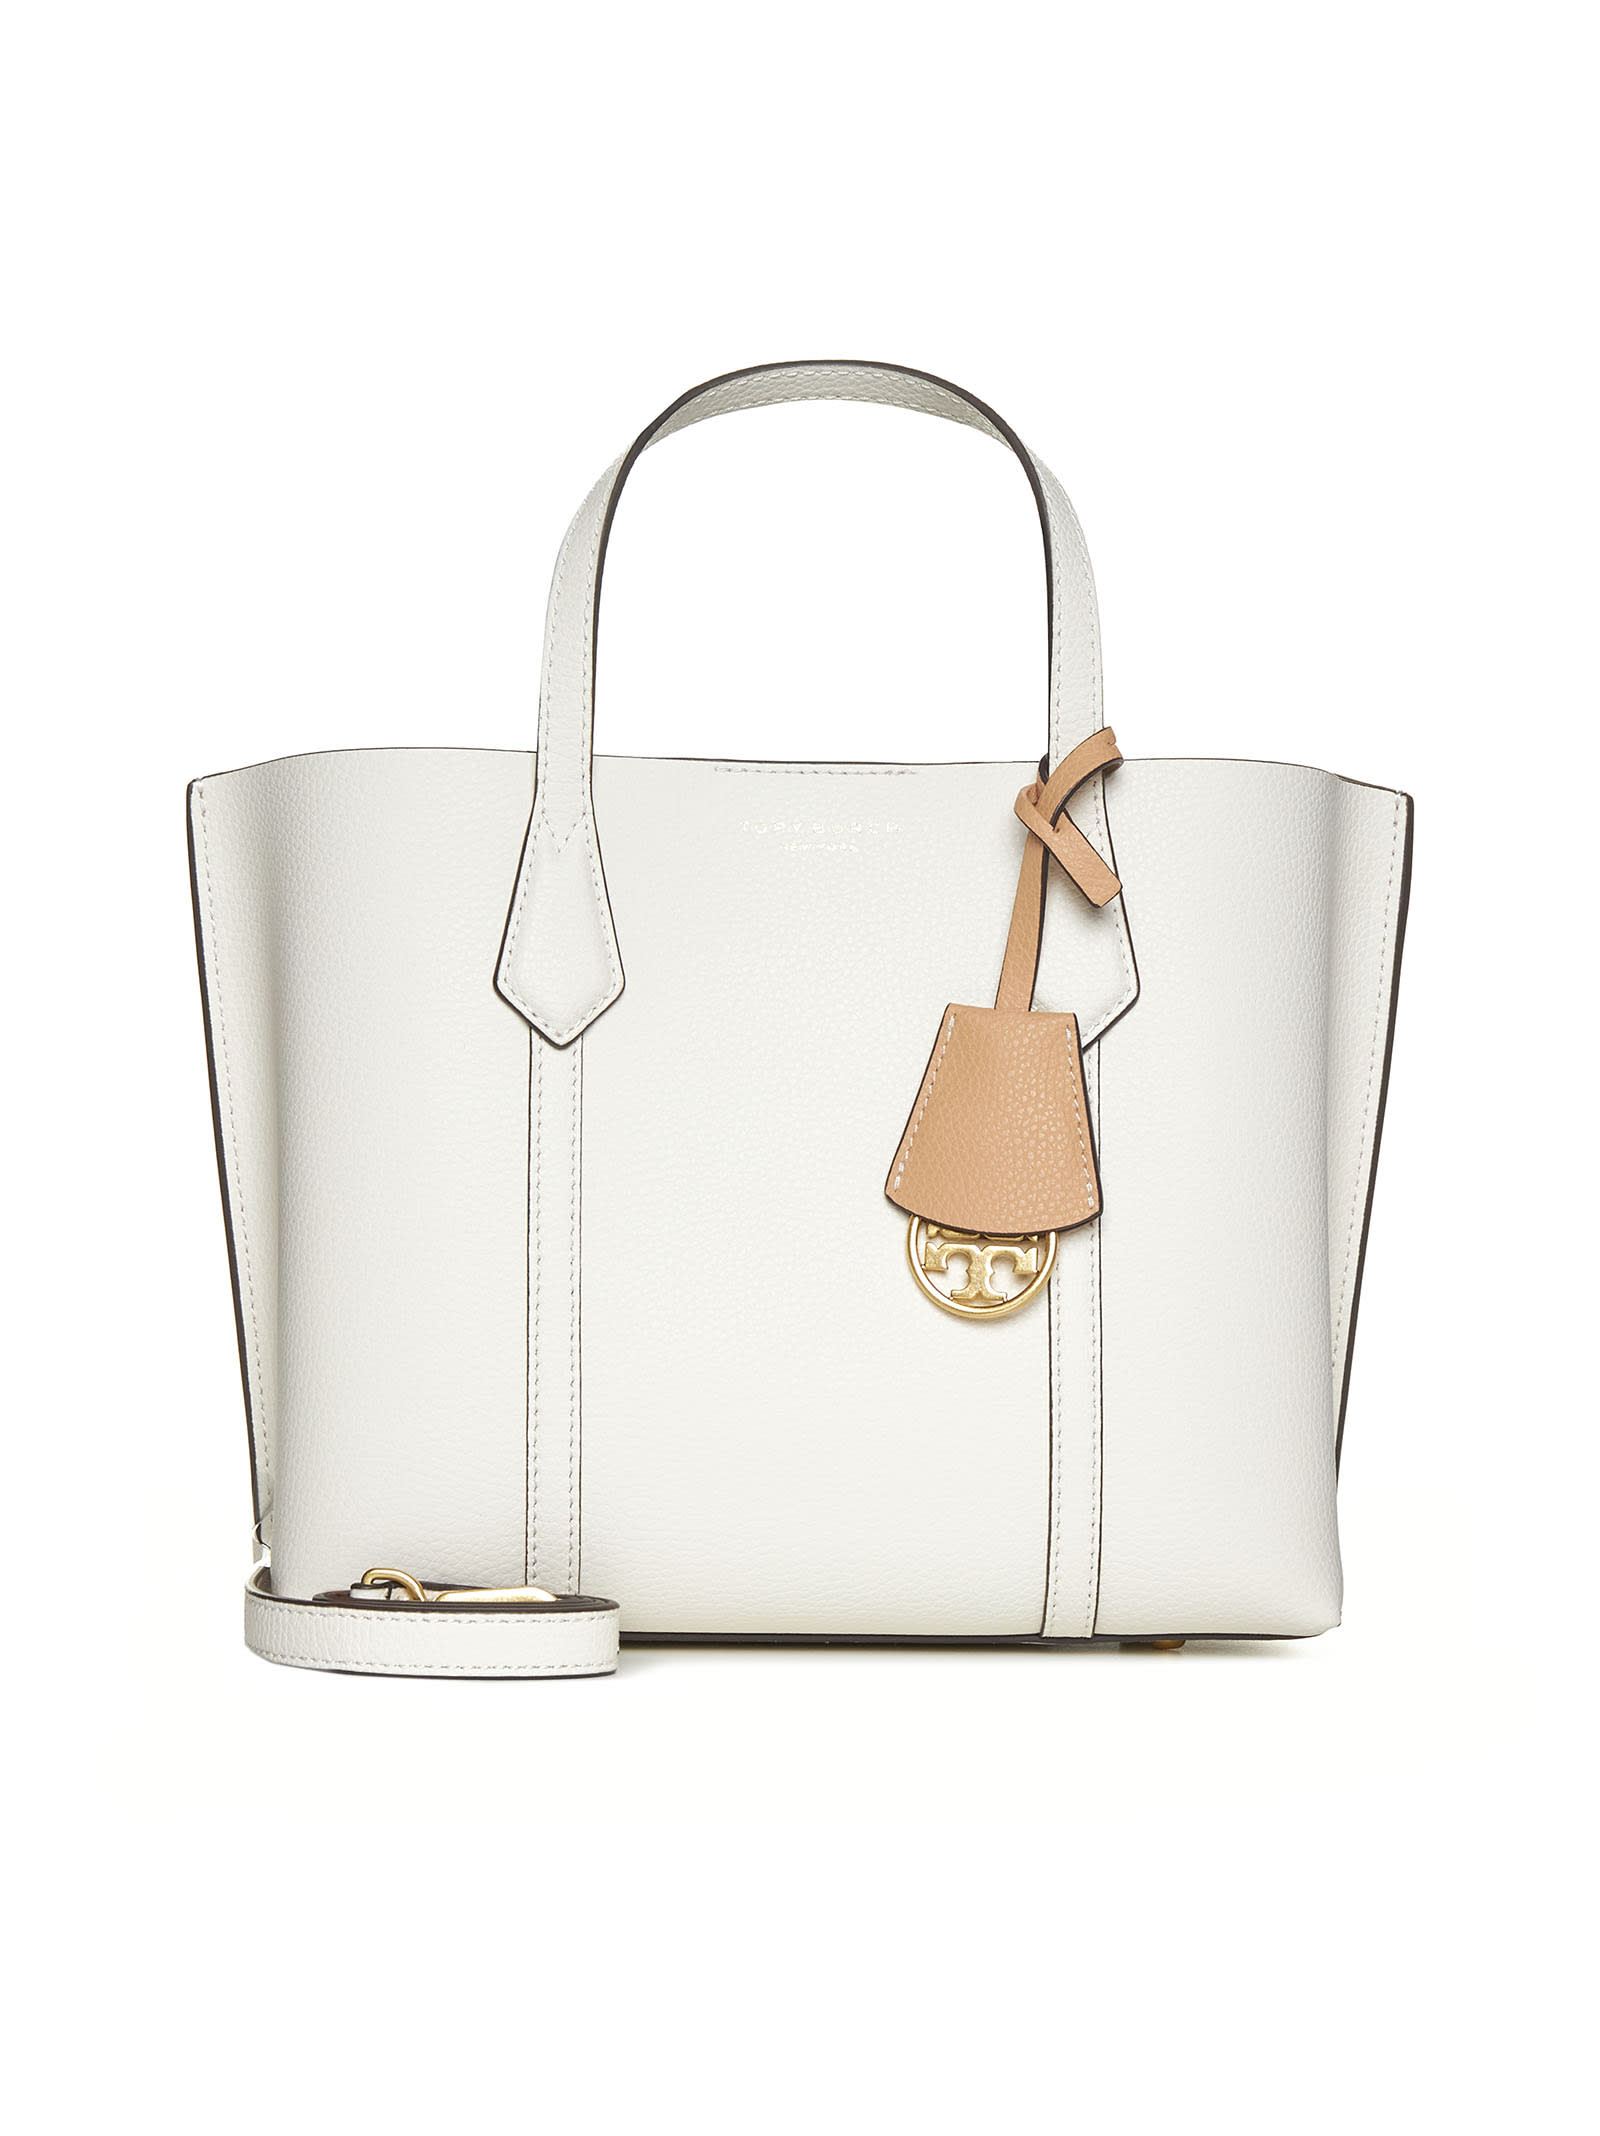 Tory Burch Tote In New Ivory